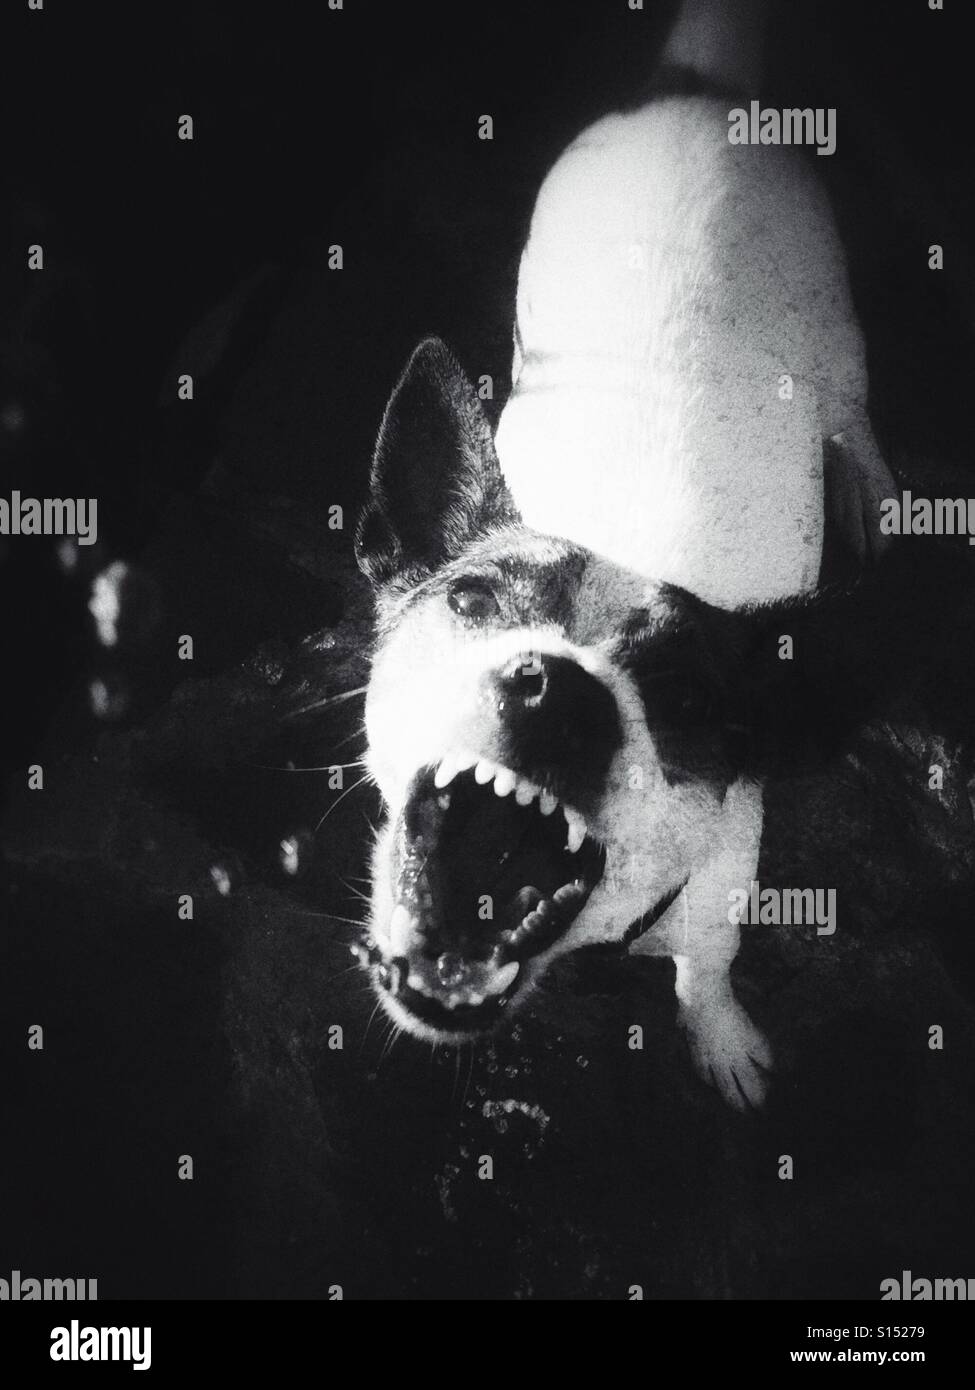 Dog baring her teeth while looking at the camera. In black and whit. Stock Photo